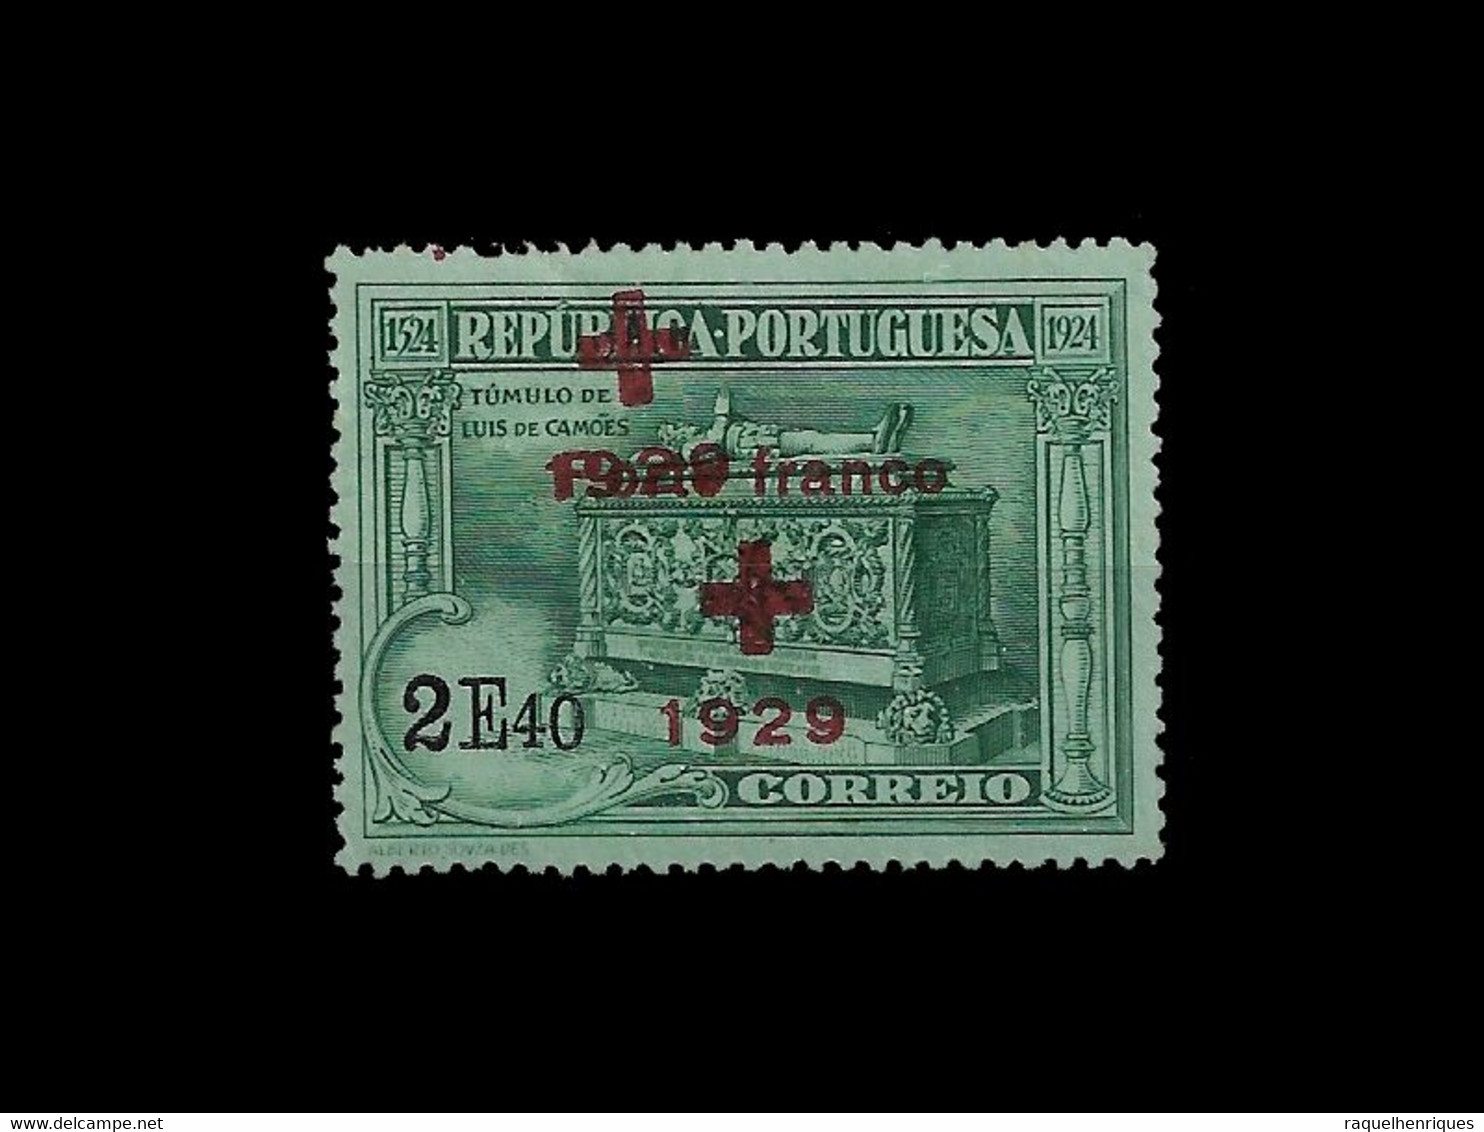 PORTUGAL PORTE FRANCO - 1929 ERROR DOUBLE SURCHARGED MH (PLB#01-101) - Unused Stamps